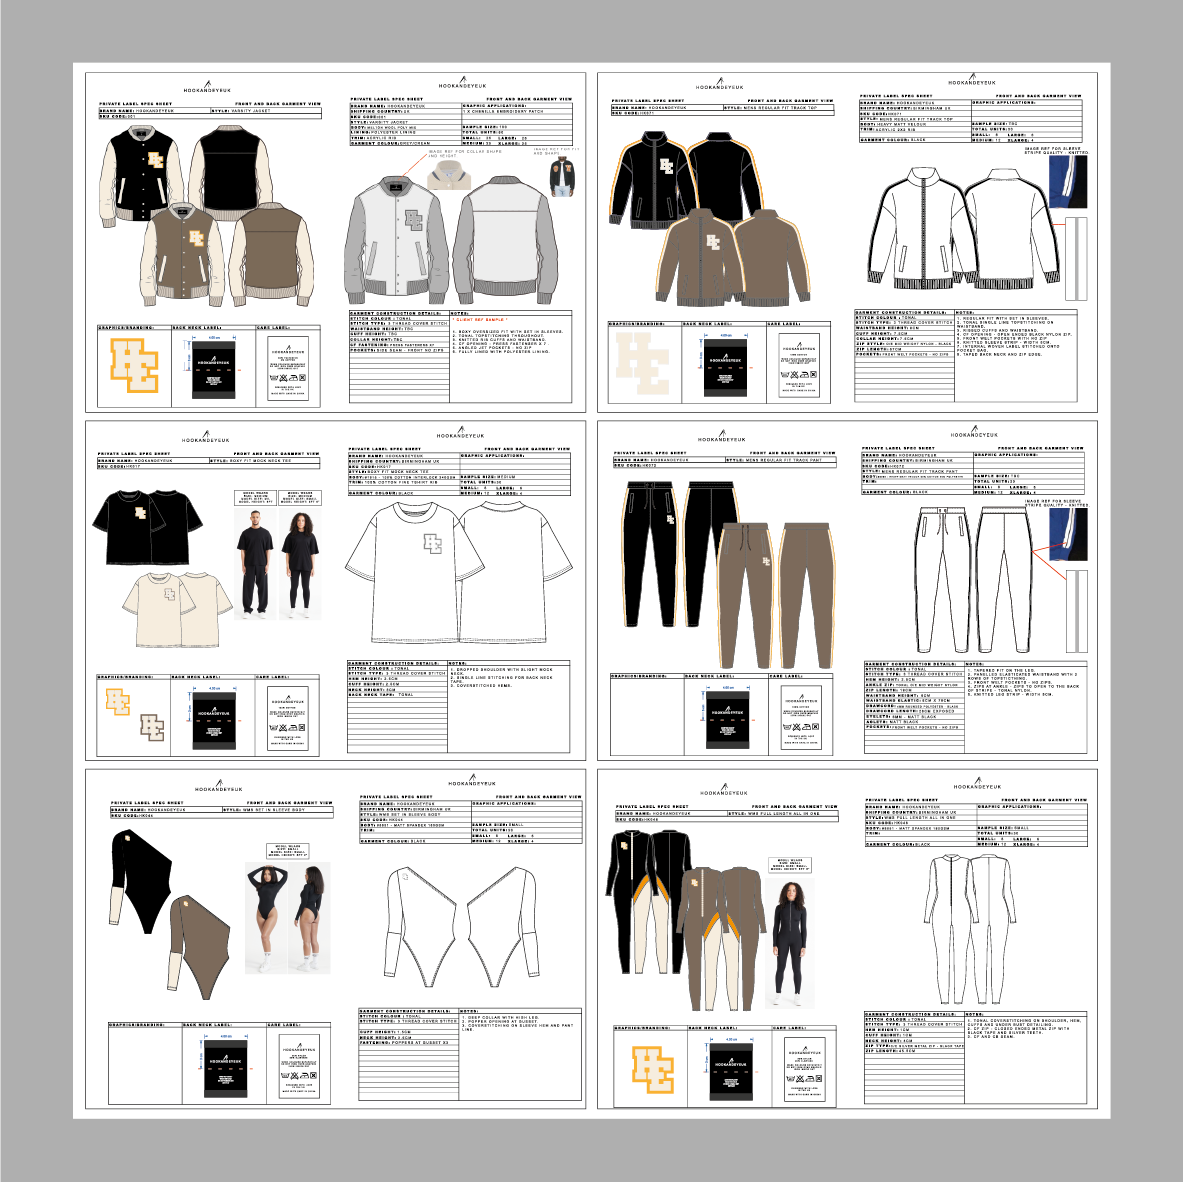 TECH PACK DESIGN SESSION FOR CLOTHING BRANDS 